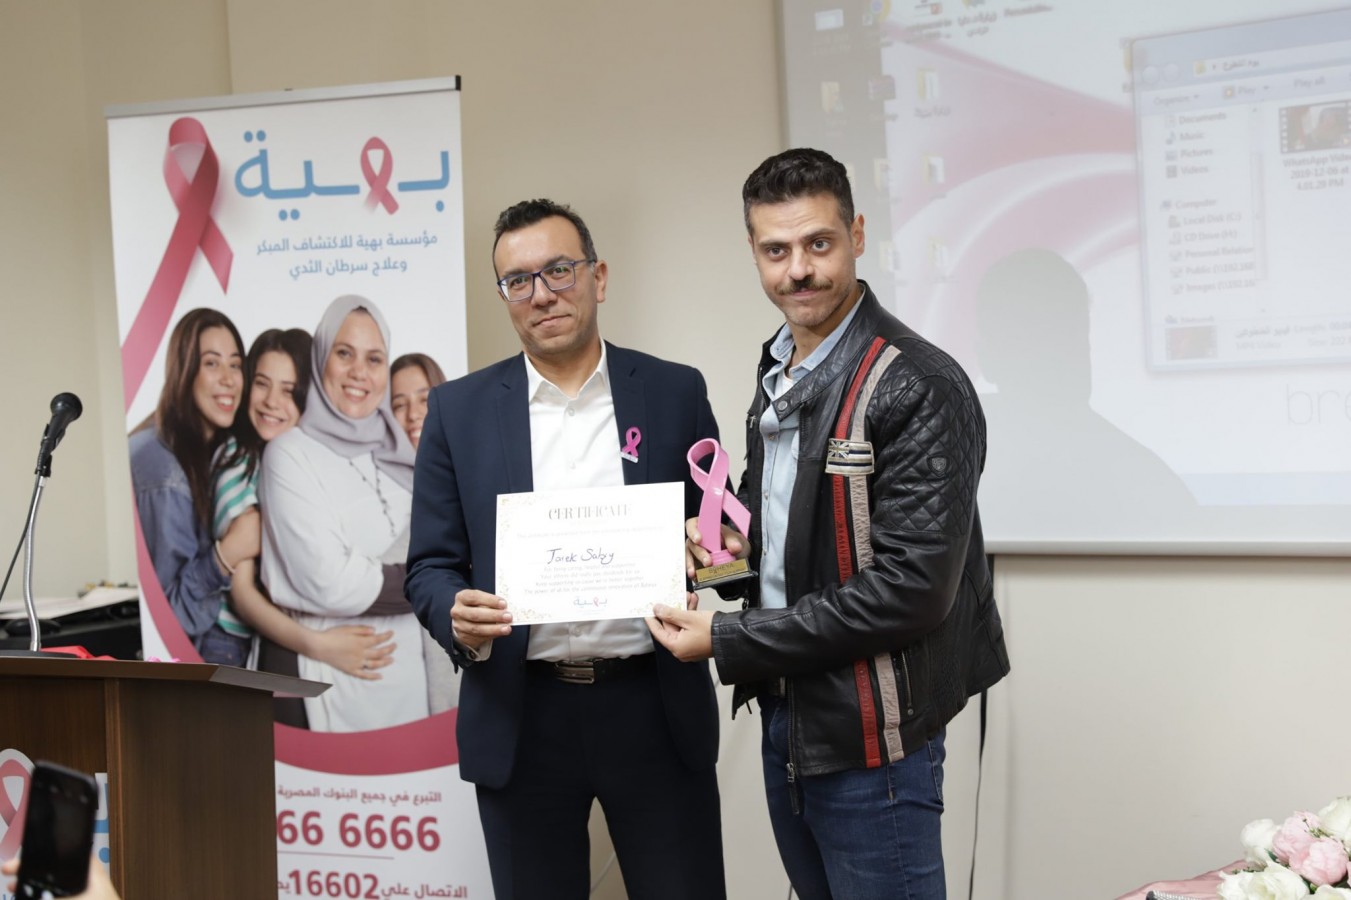 Baheya celebrated the International Volunteer Day with the cancer fighters and their children with the attendance of MR Tamer Shawqi, the head of Baheya’s board, Baheya’s